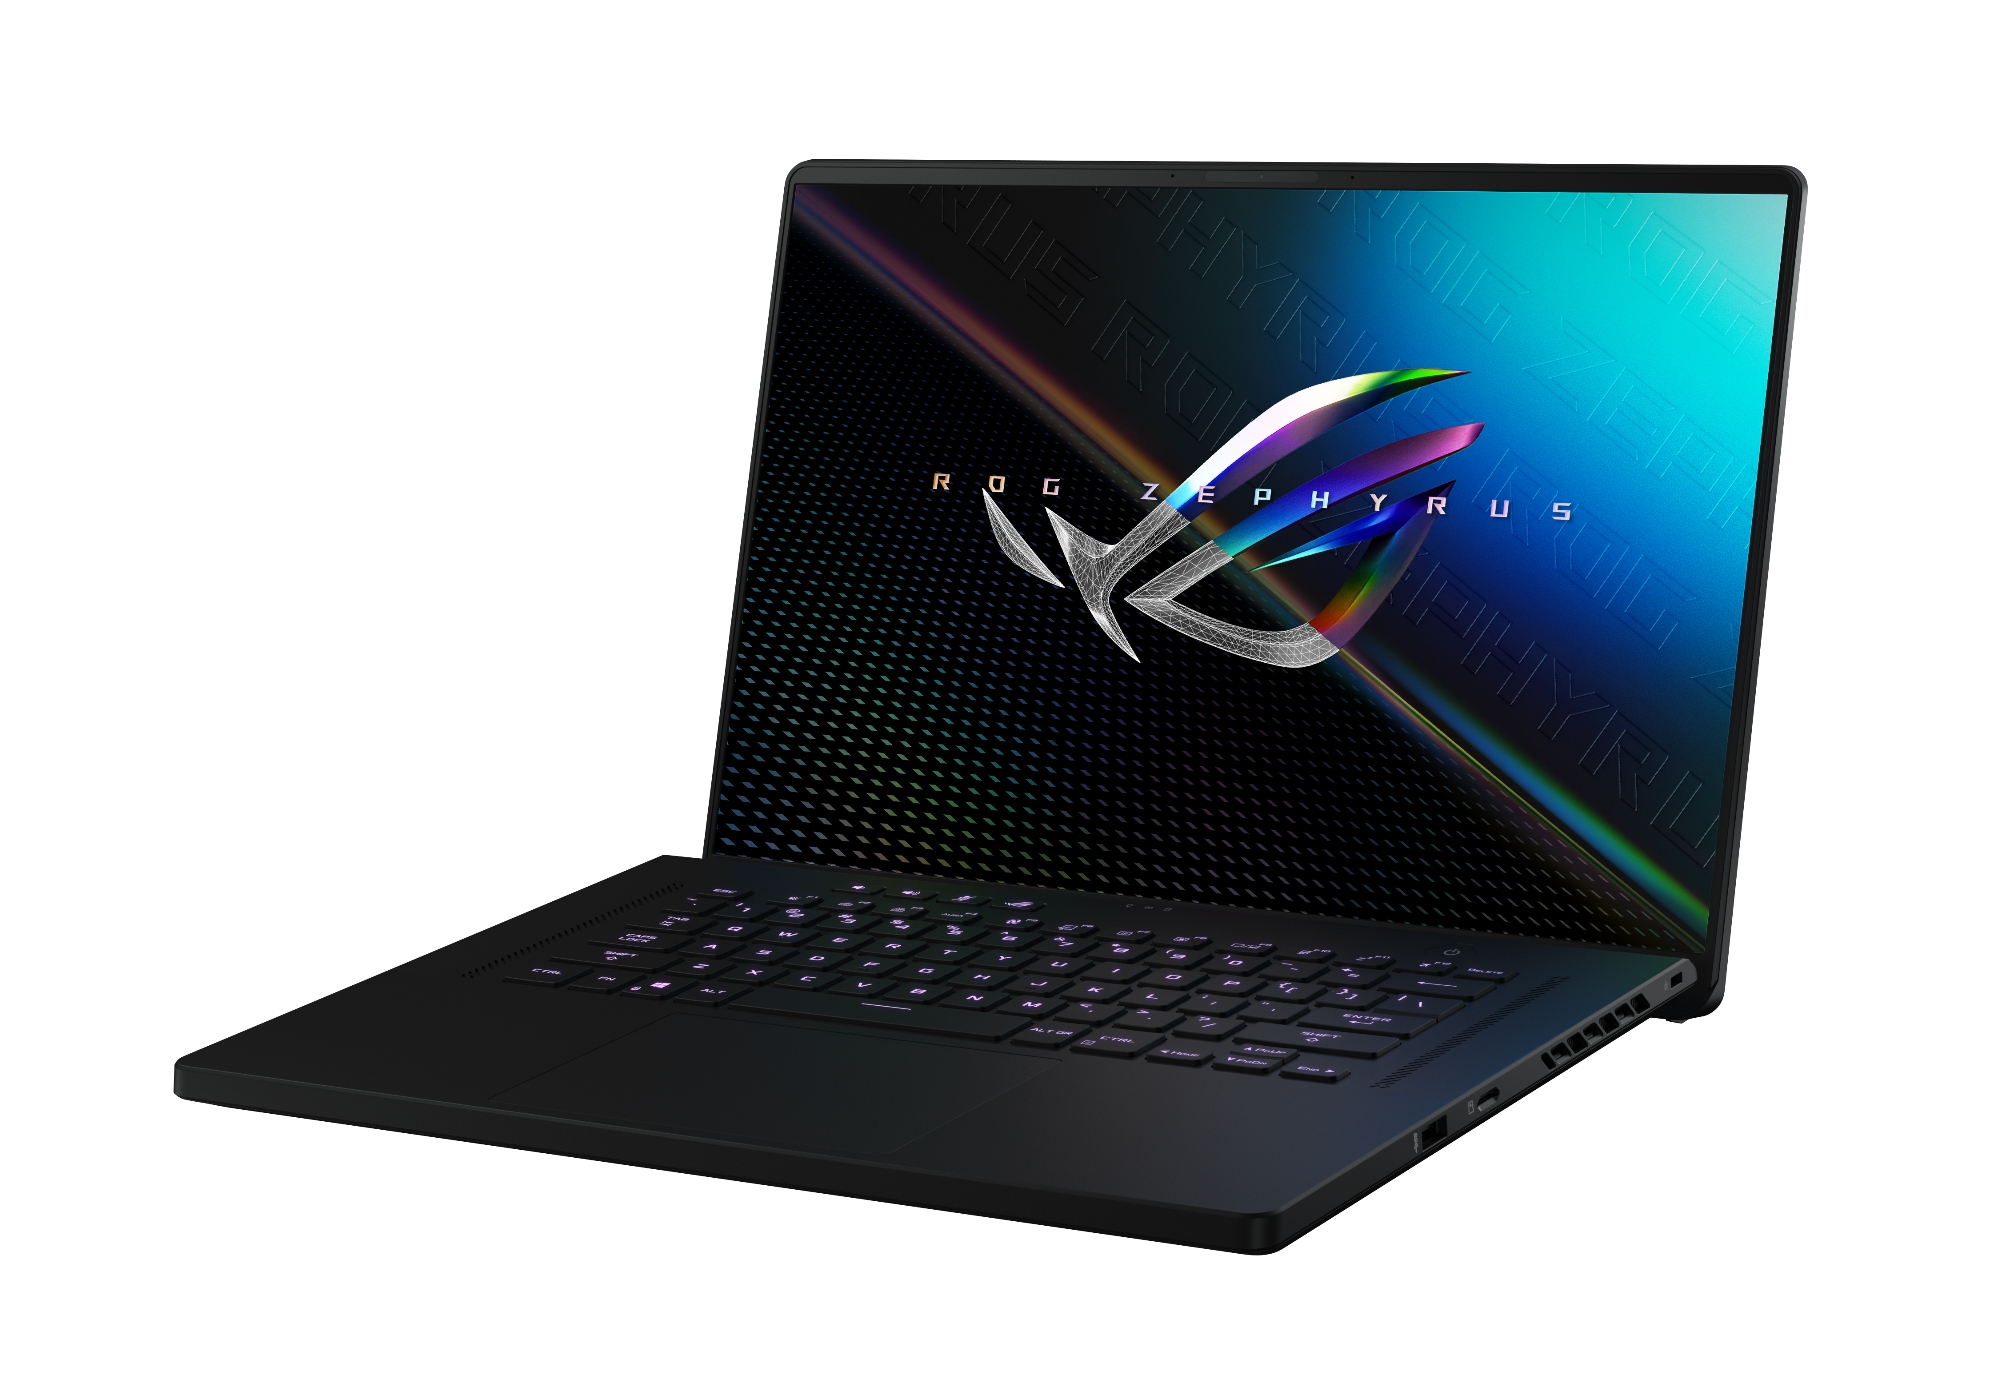 ASUS has announced Zephyrus M16 with 16-inch screen and Intel Core i9-11900H chip